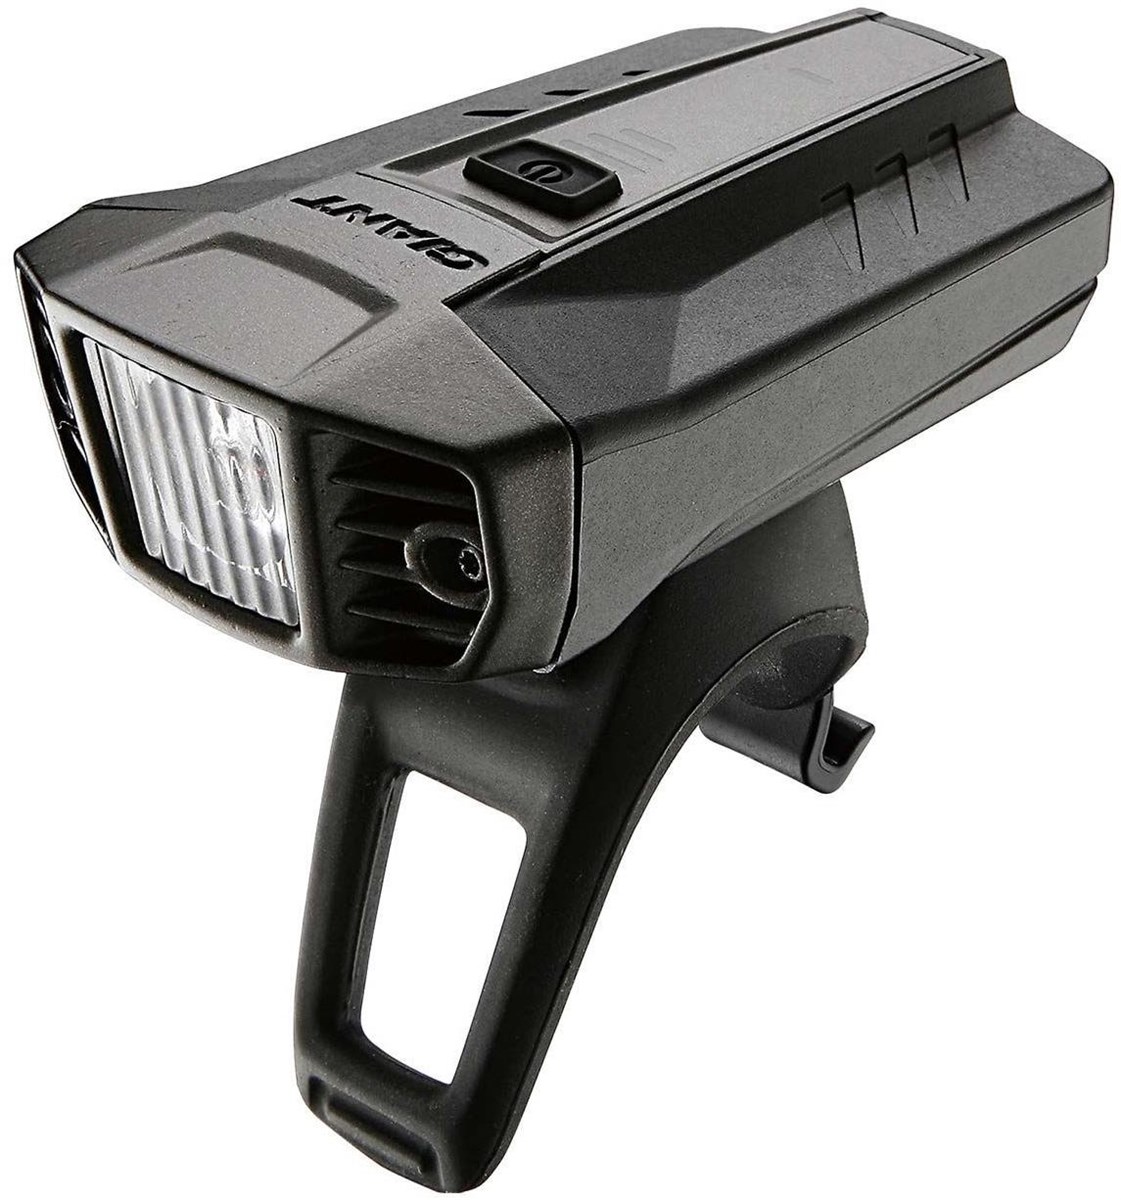 Giant Numen+ HL1 USB Rechargeable Front Light product image